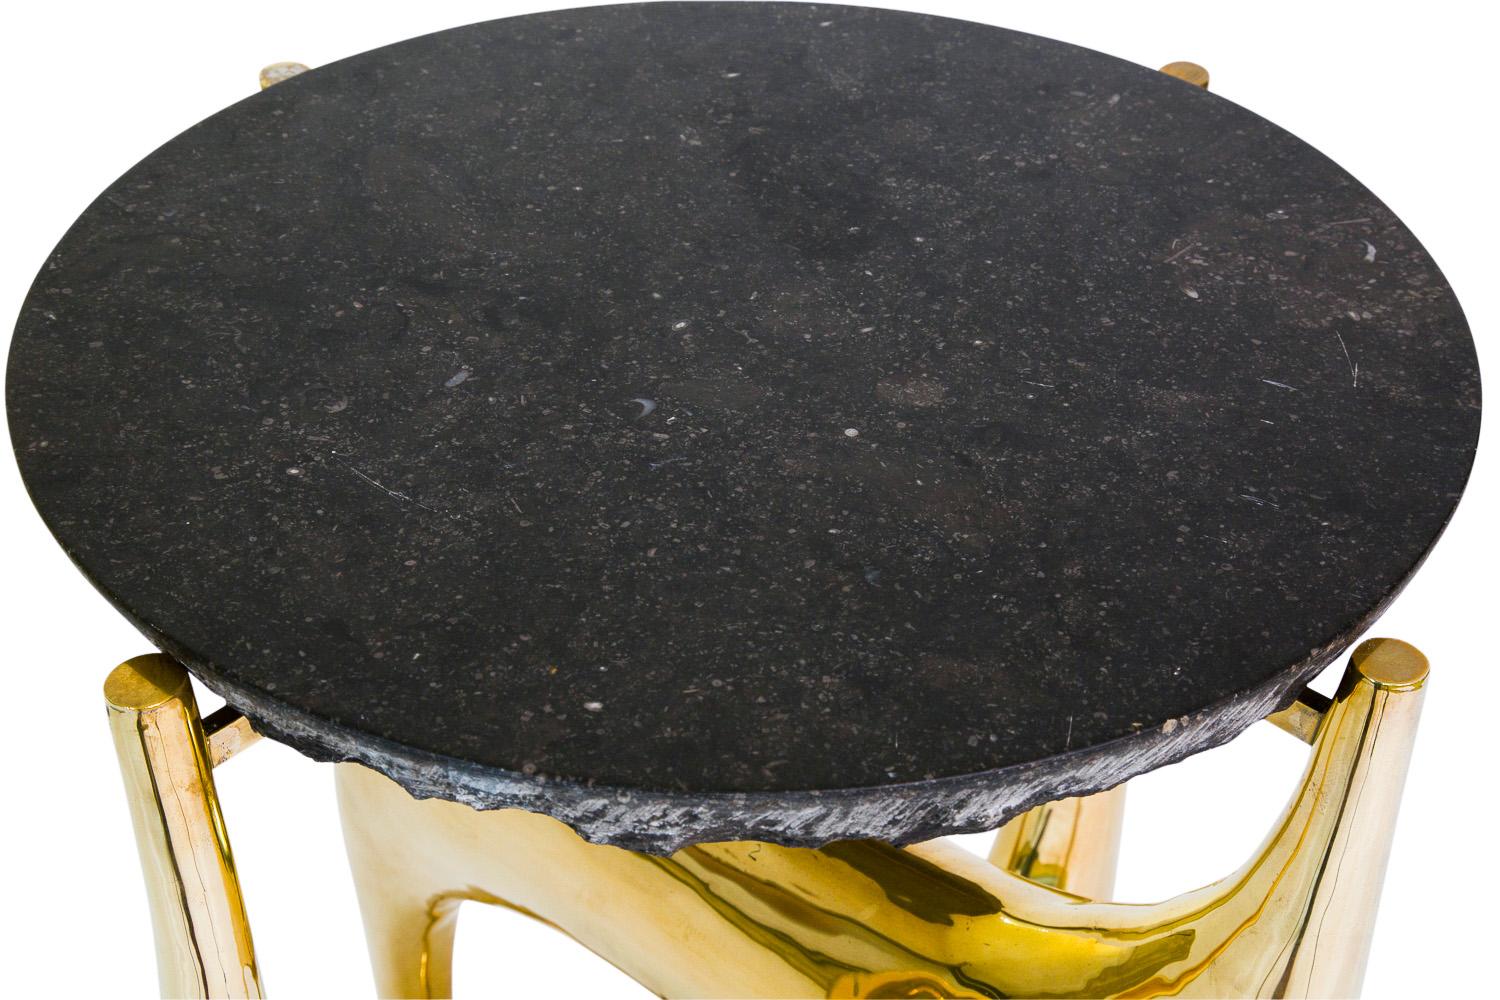 Hammered Philippe Hiquily ‘Marie-Laure de Noailles' Pedestal Table